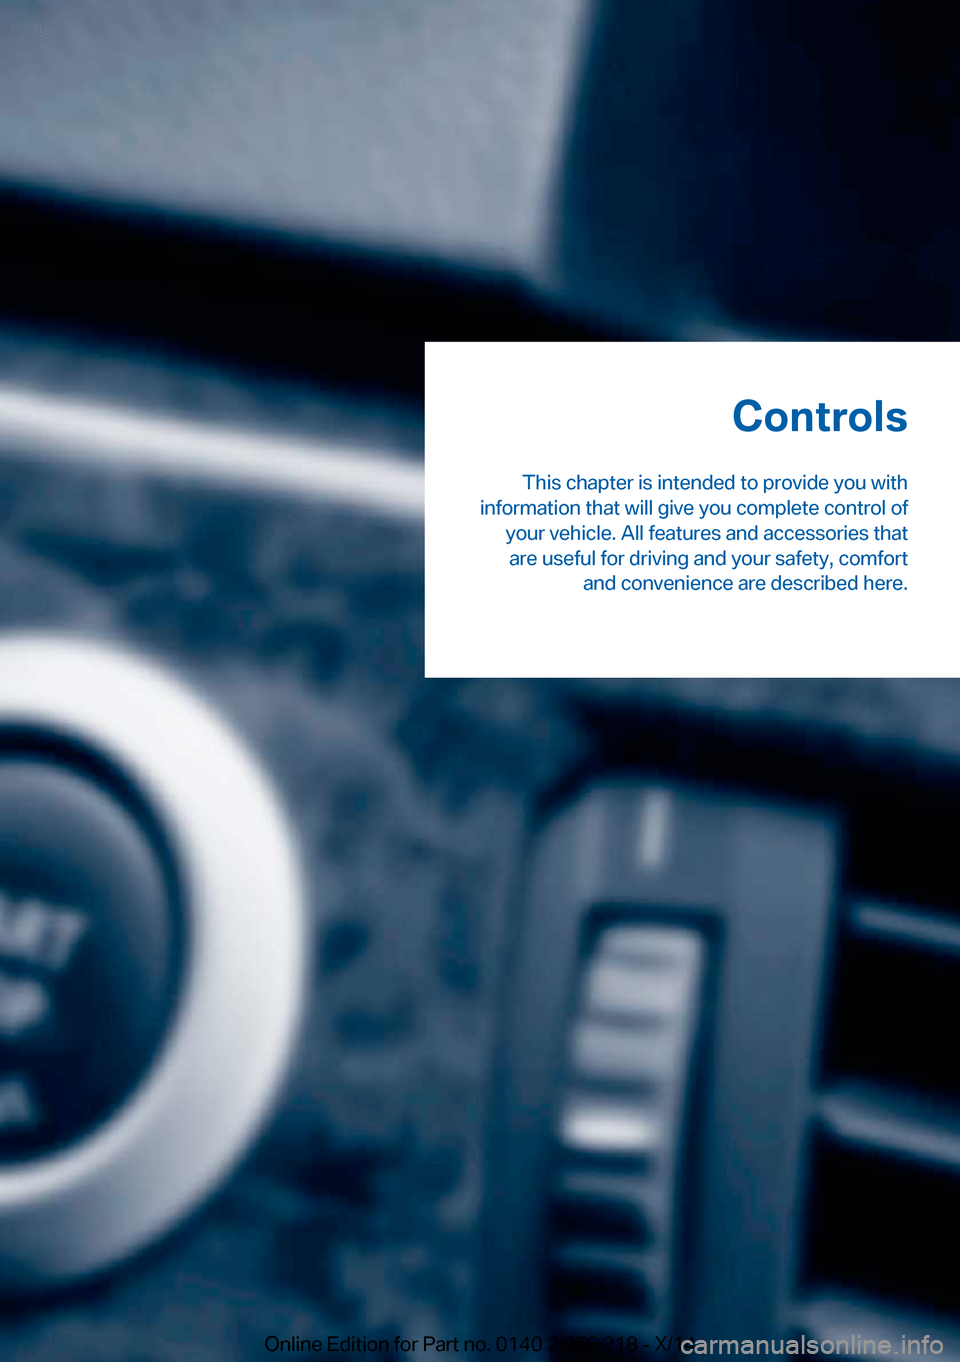 BMW 5 SERIES 2014 F10 User Guide Controls
This chapter is intended to provide you with
information that will give you complete control of your vehicle. All features and accessories thatare useful for driving and your safety, comfort 